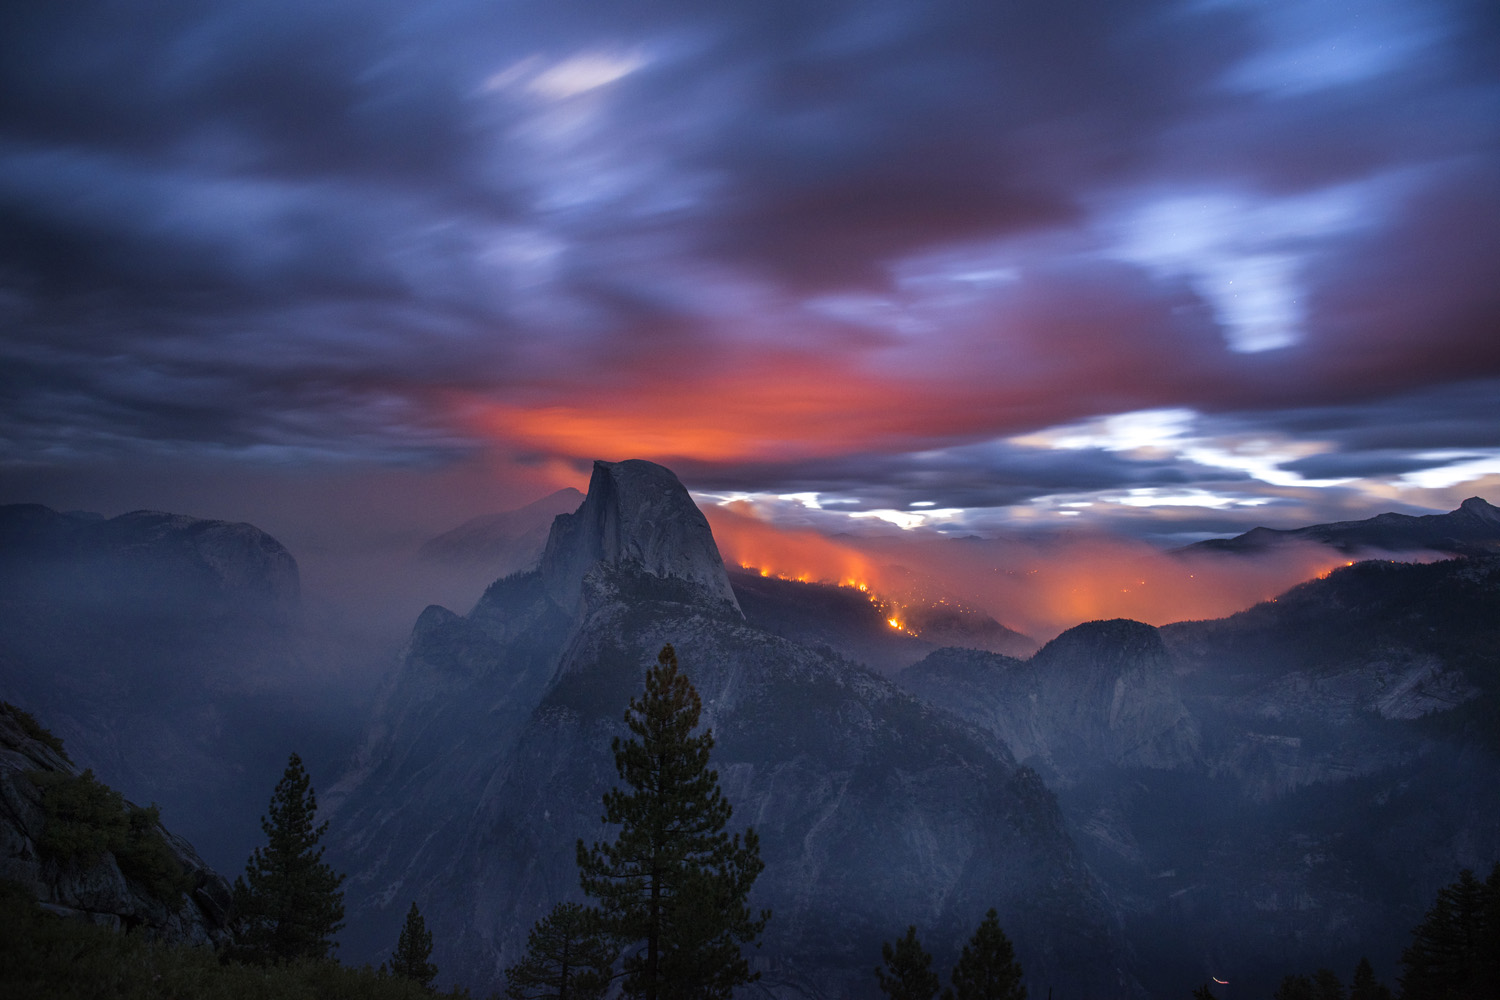 The Meadow Fire burns at dawn near Half Dome in Yosemite National Park early Monday September 8, 2014. As of Wednesday the fire had burned over 4,500 acres and was 10% contained. Long exposure image.